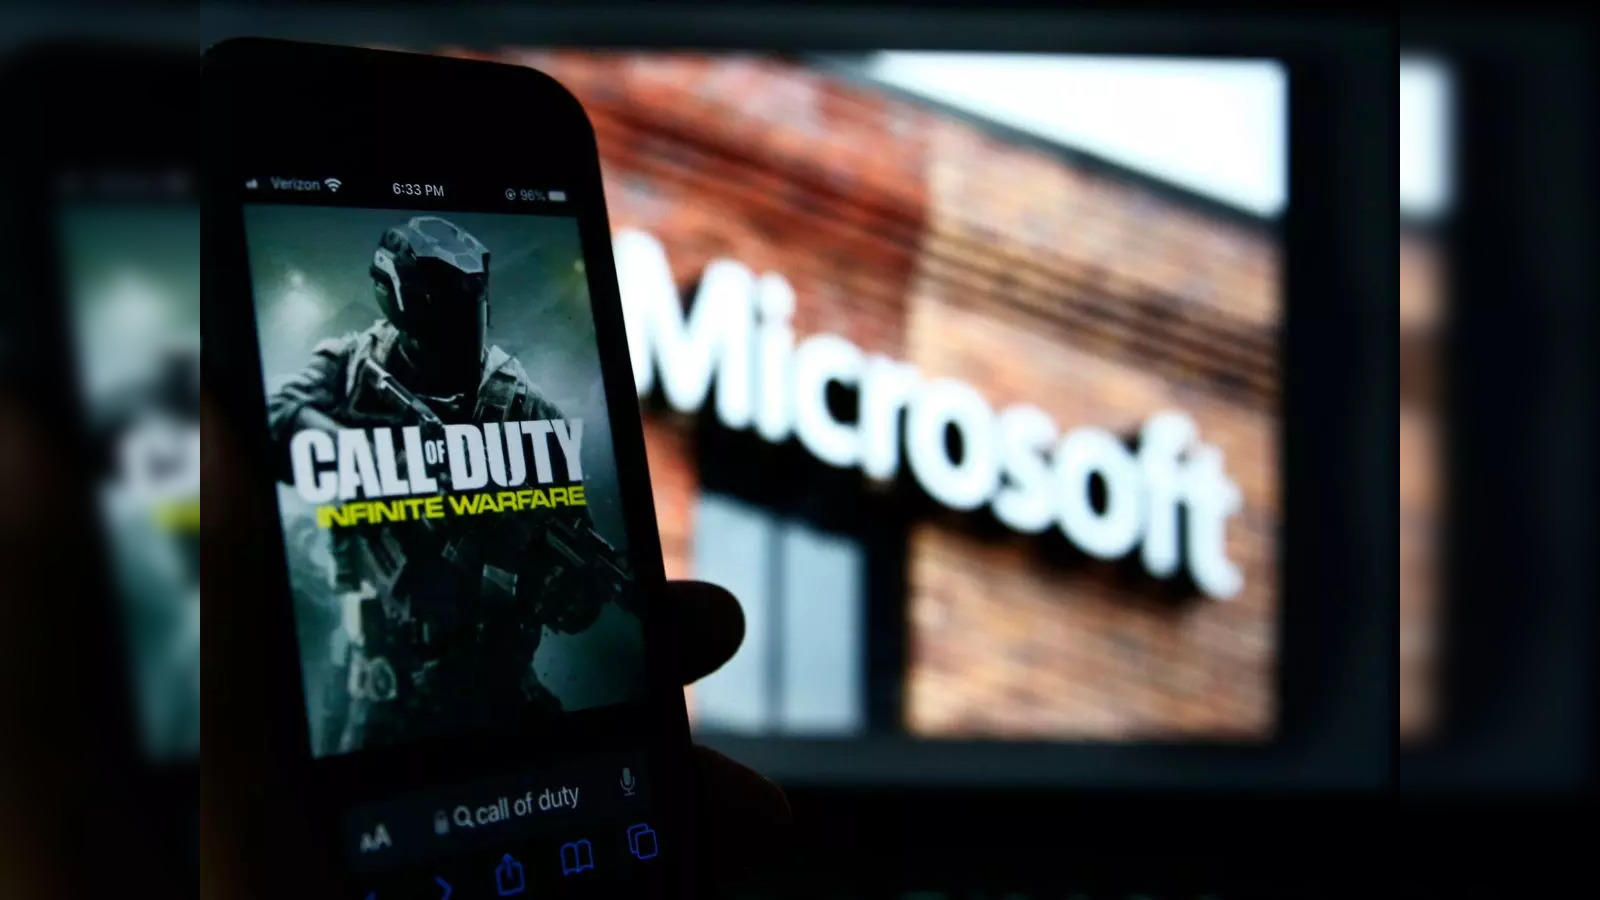 Microsoft-Activision deal in final stages after positive